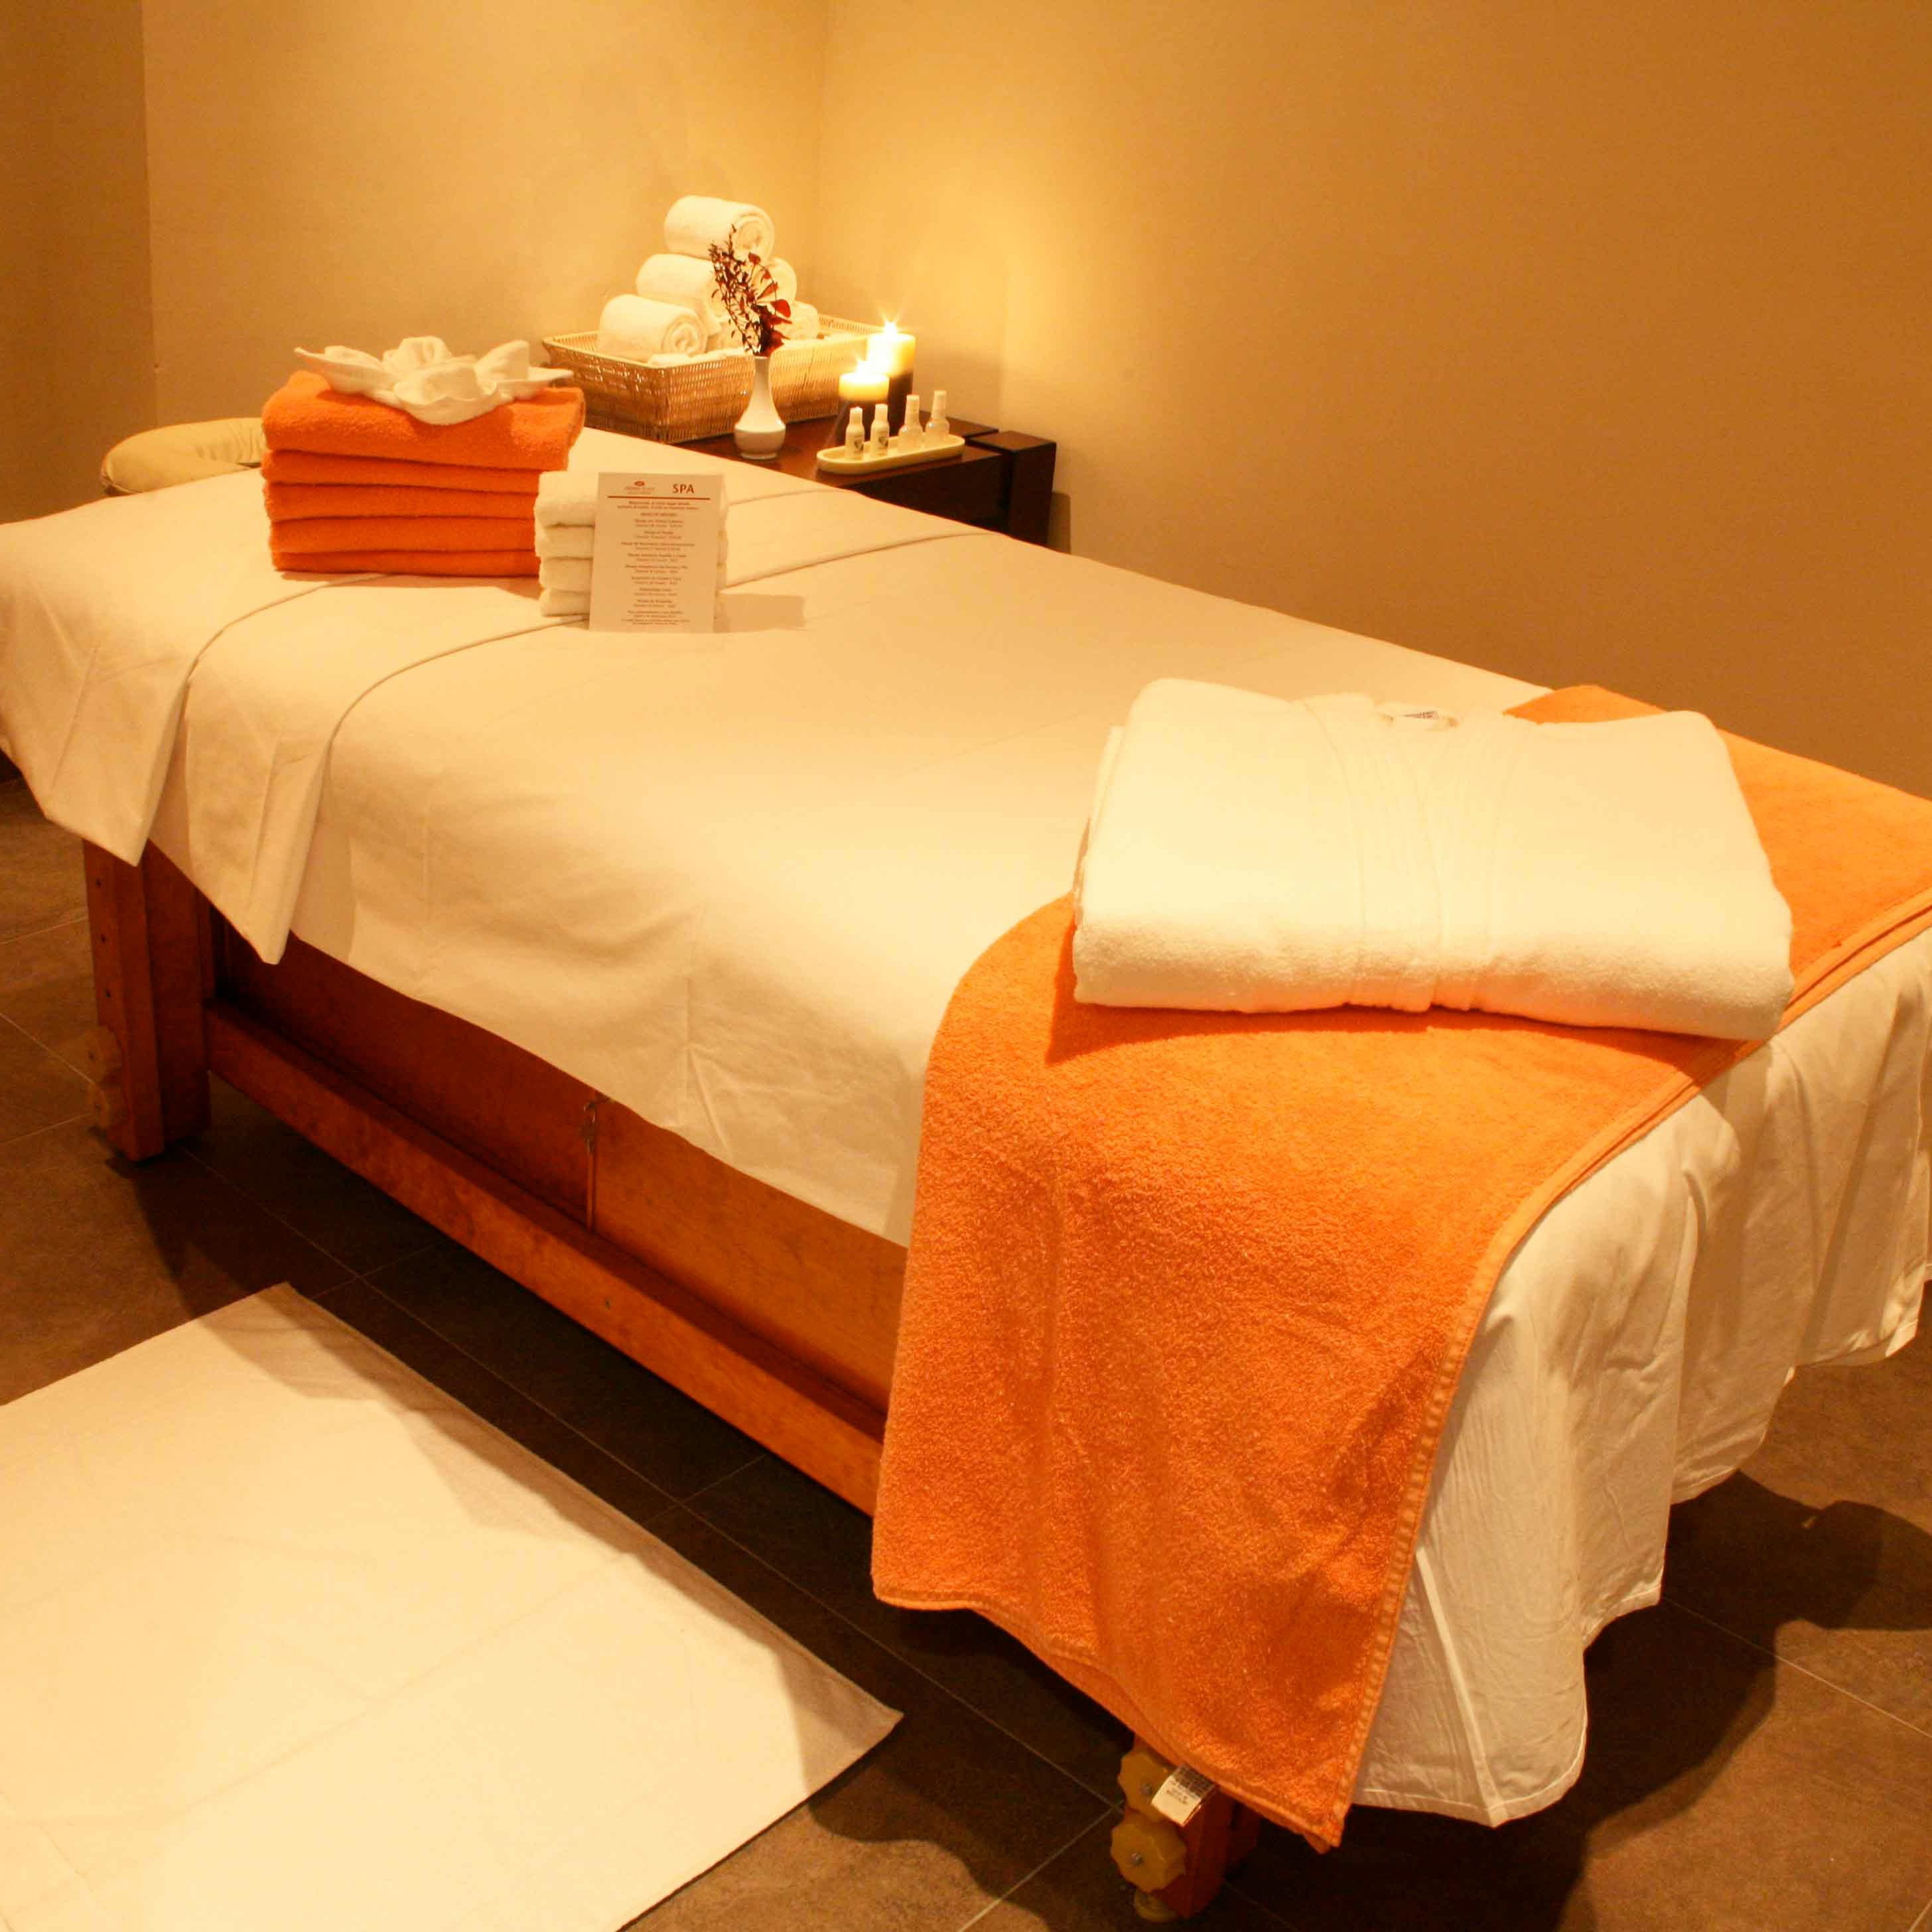 Unwind with a relaxing massage at our Spa.